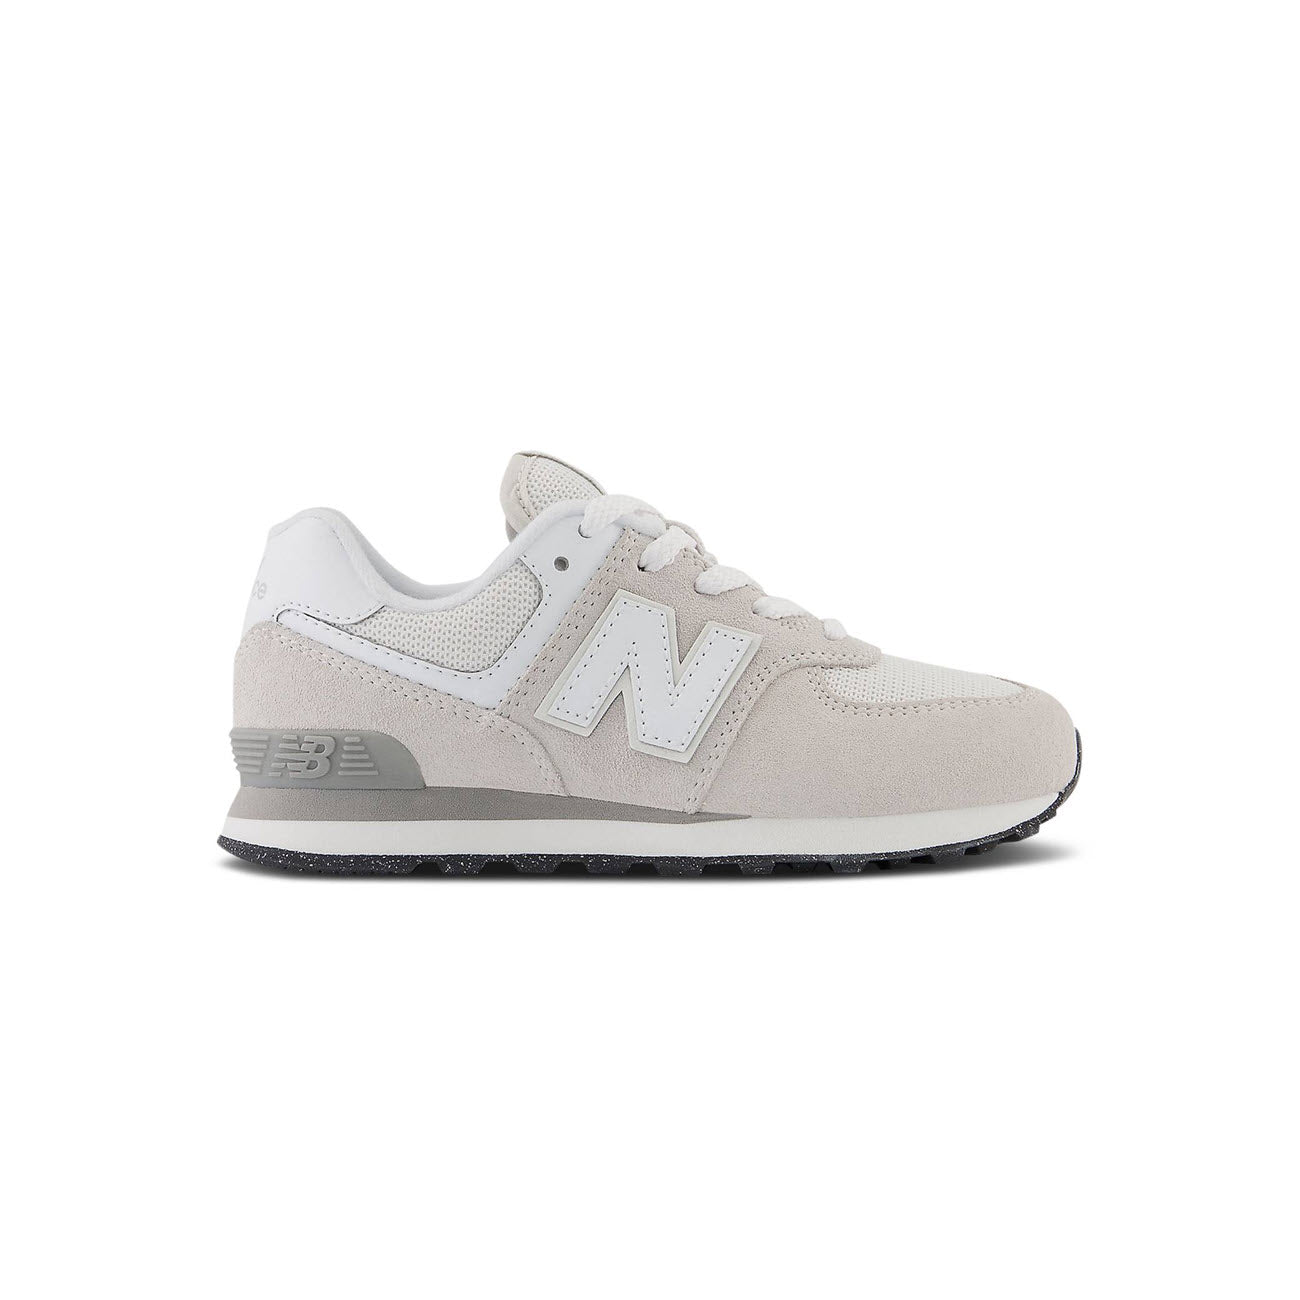 A single New Balance 574 Nimbus Cloud sneaker in light gray with a white "N" logo on the side, displayed against a pure white background.